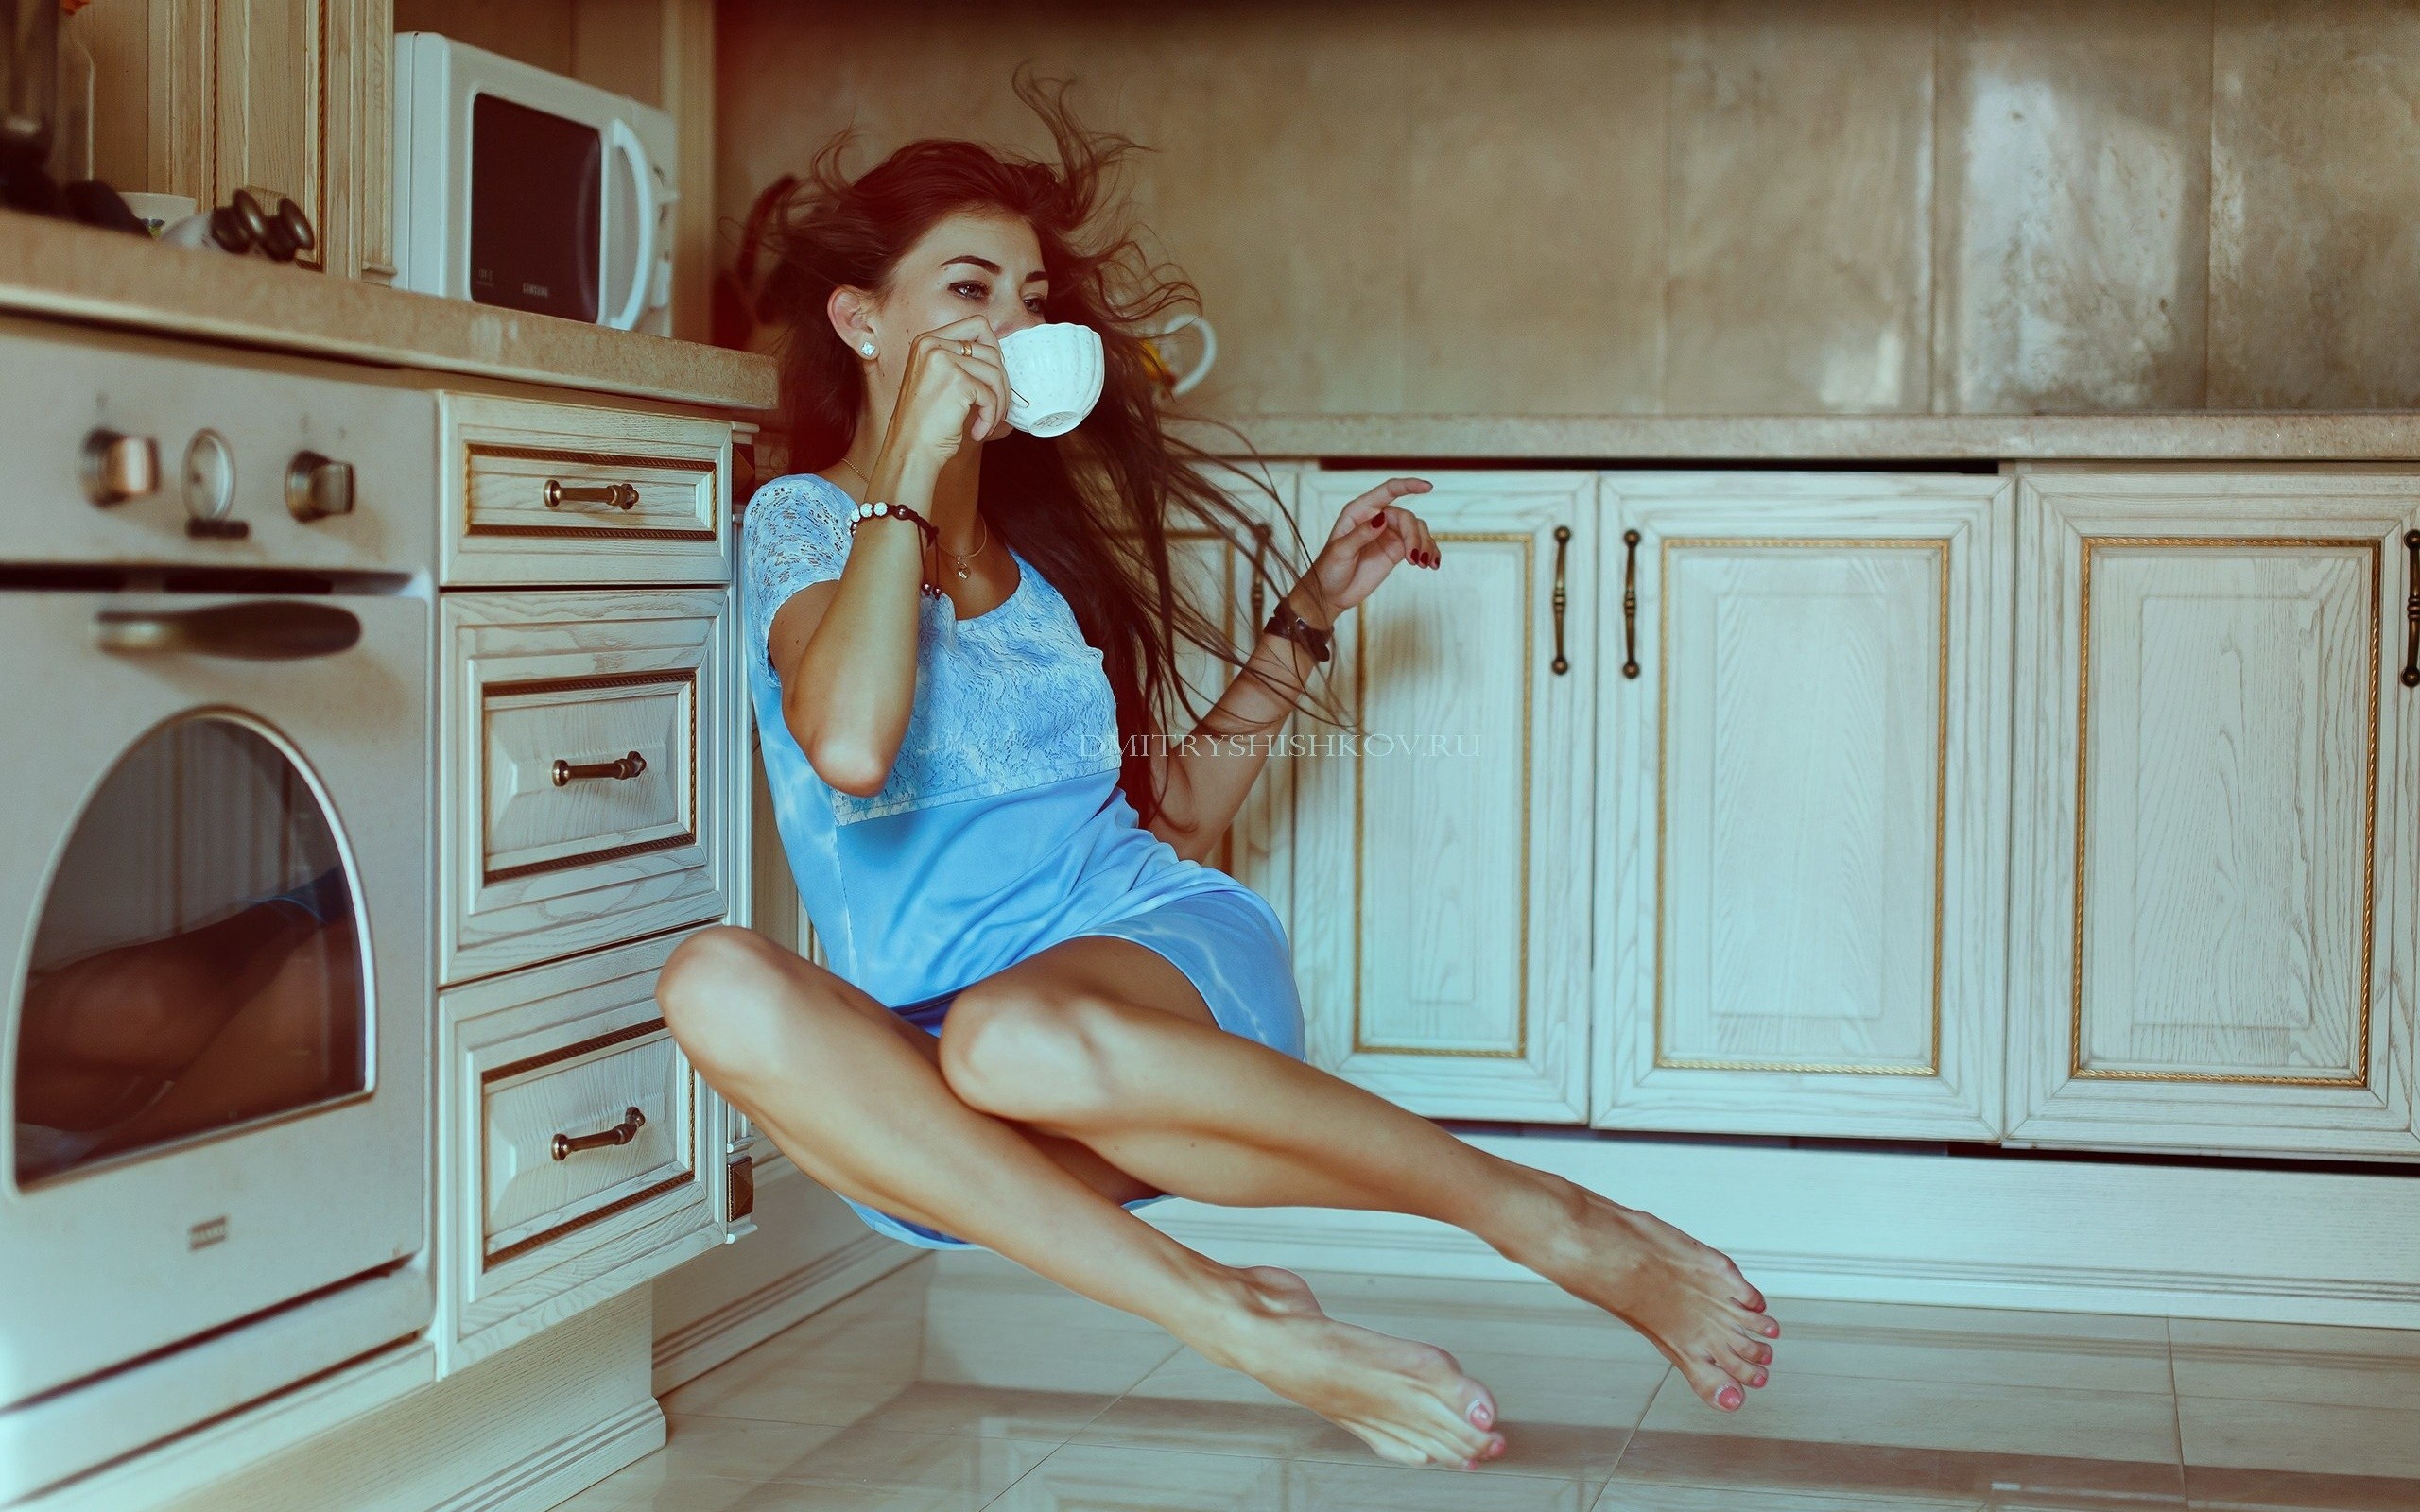 People 2560x1600 redhead kitchen women model floating legs legs together blue dress dress cup drinking women indoors indoors long hair